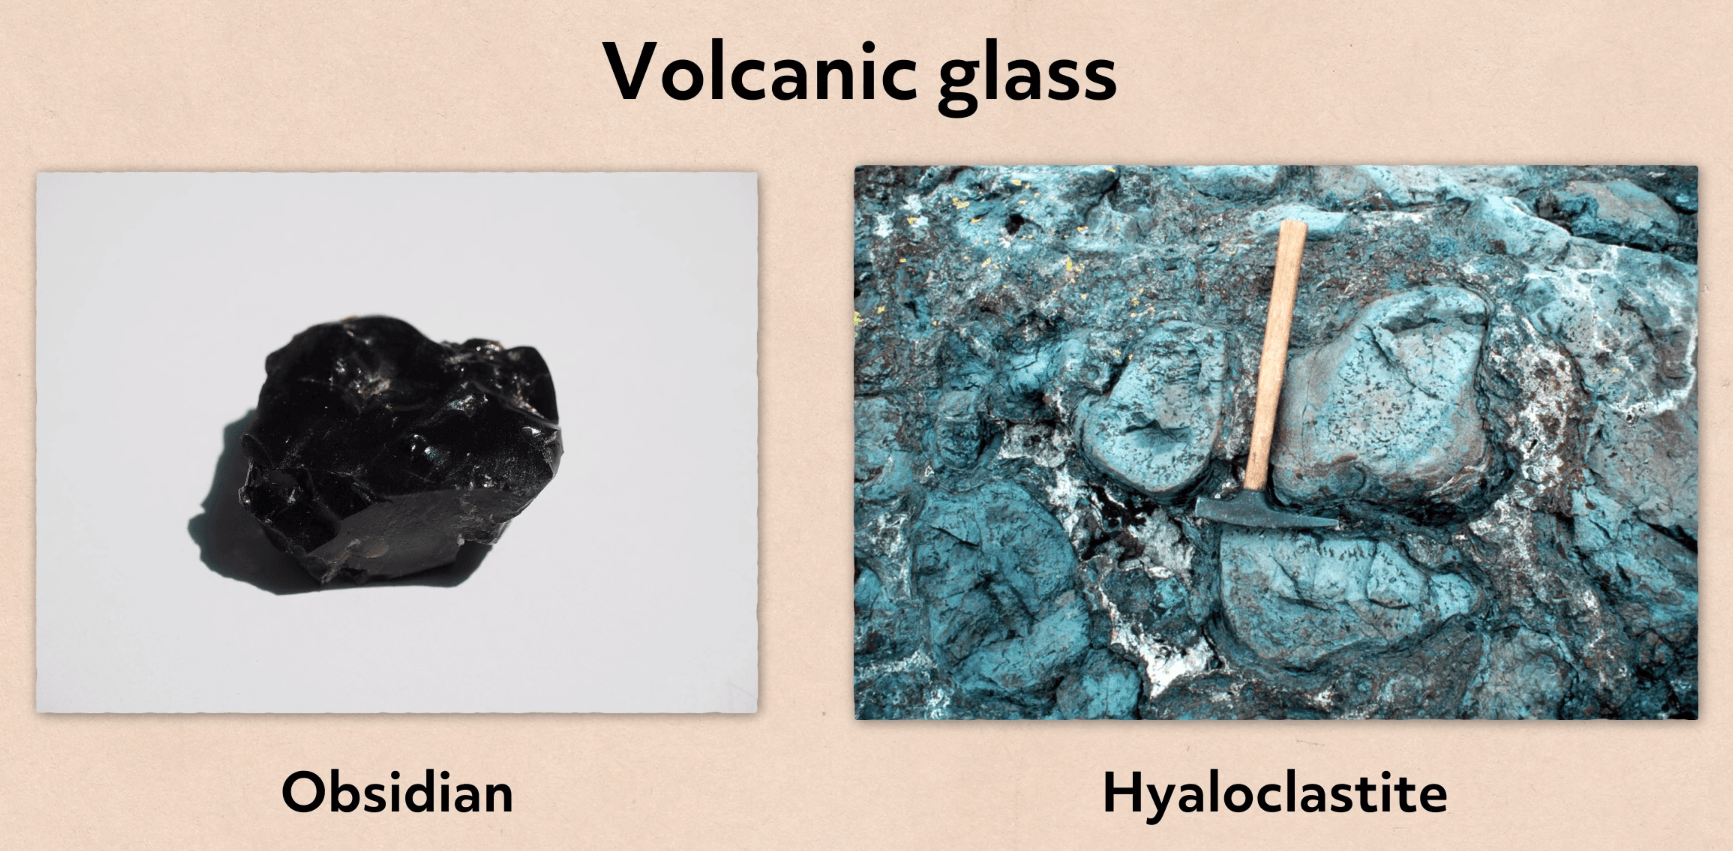 Two rocks are shown and are labeled from left to right as "Obsidian" and "Hyaloclastite"